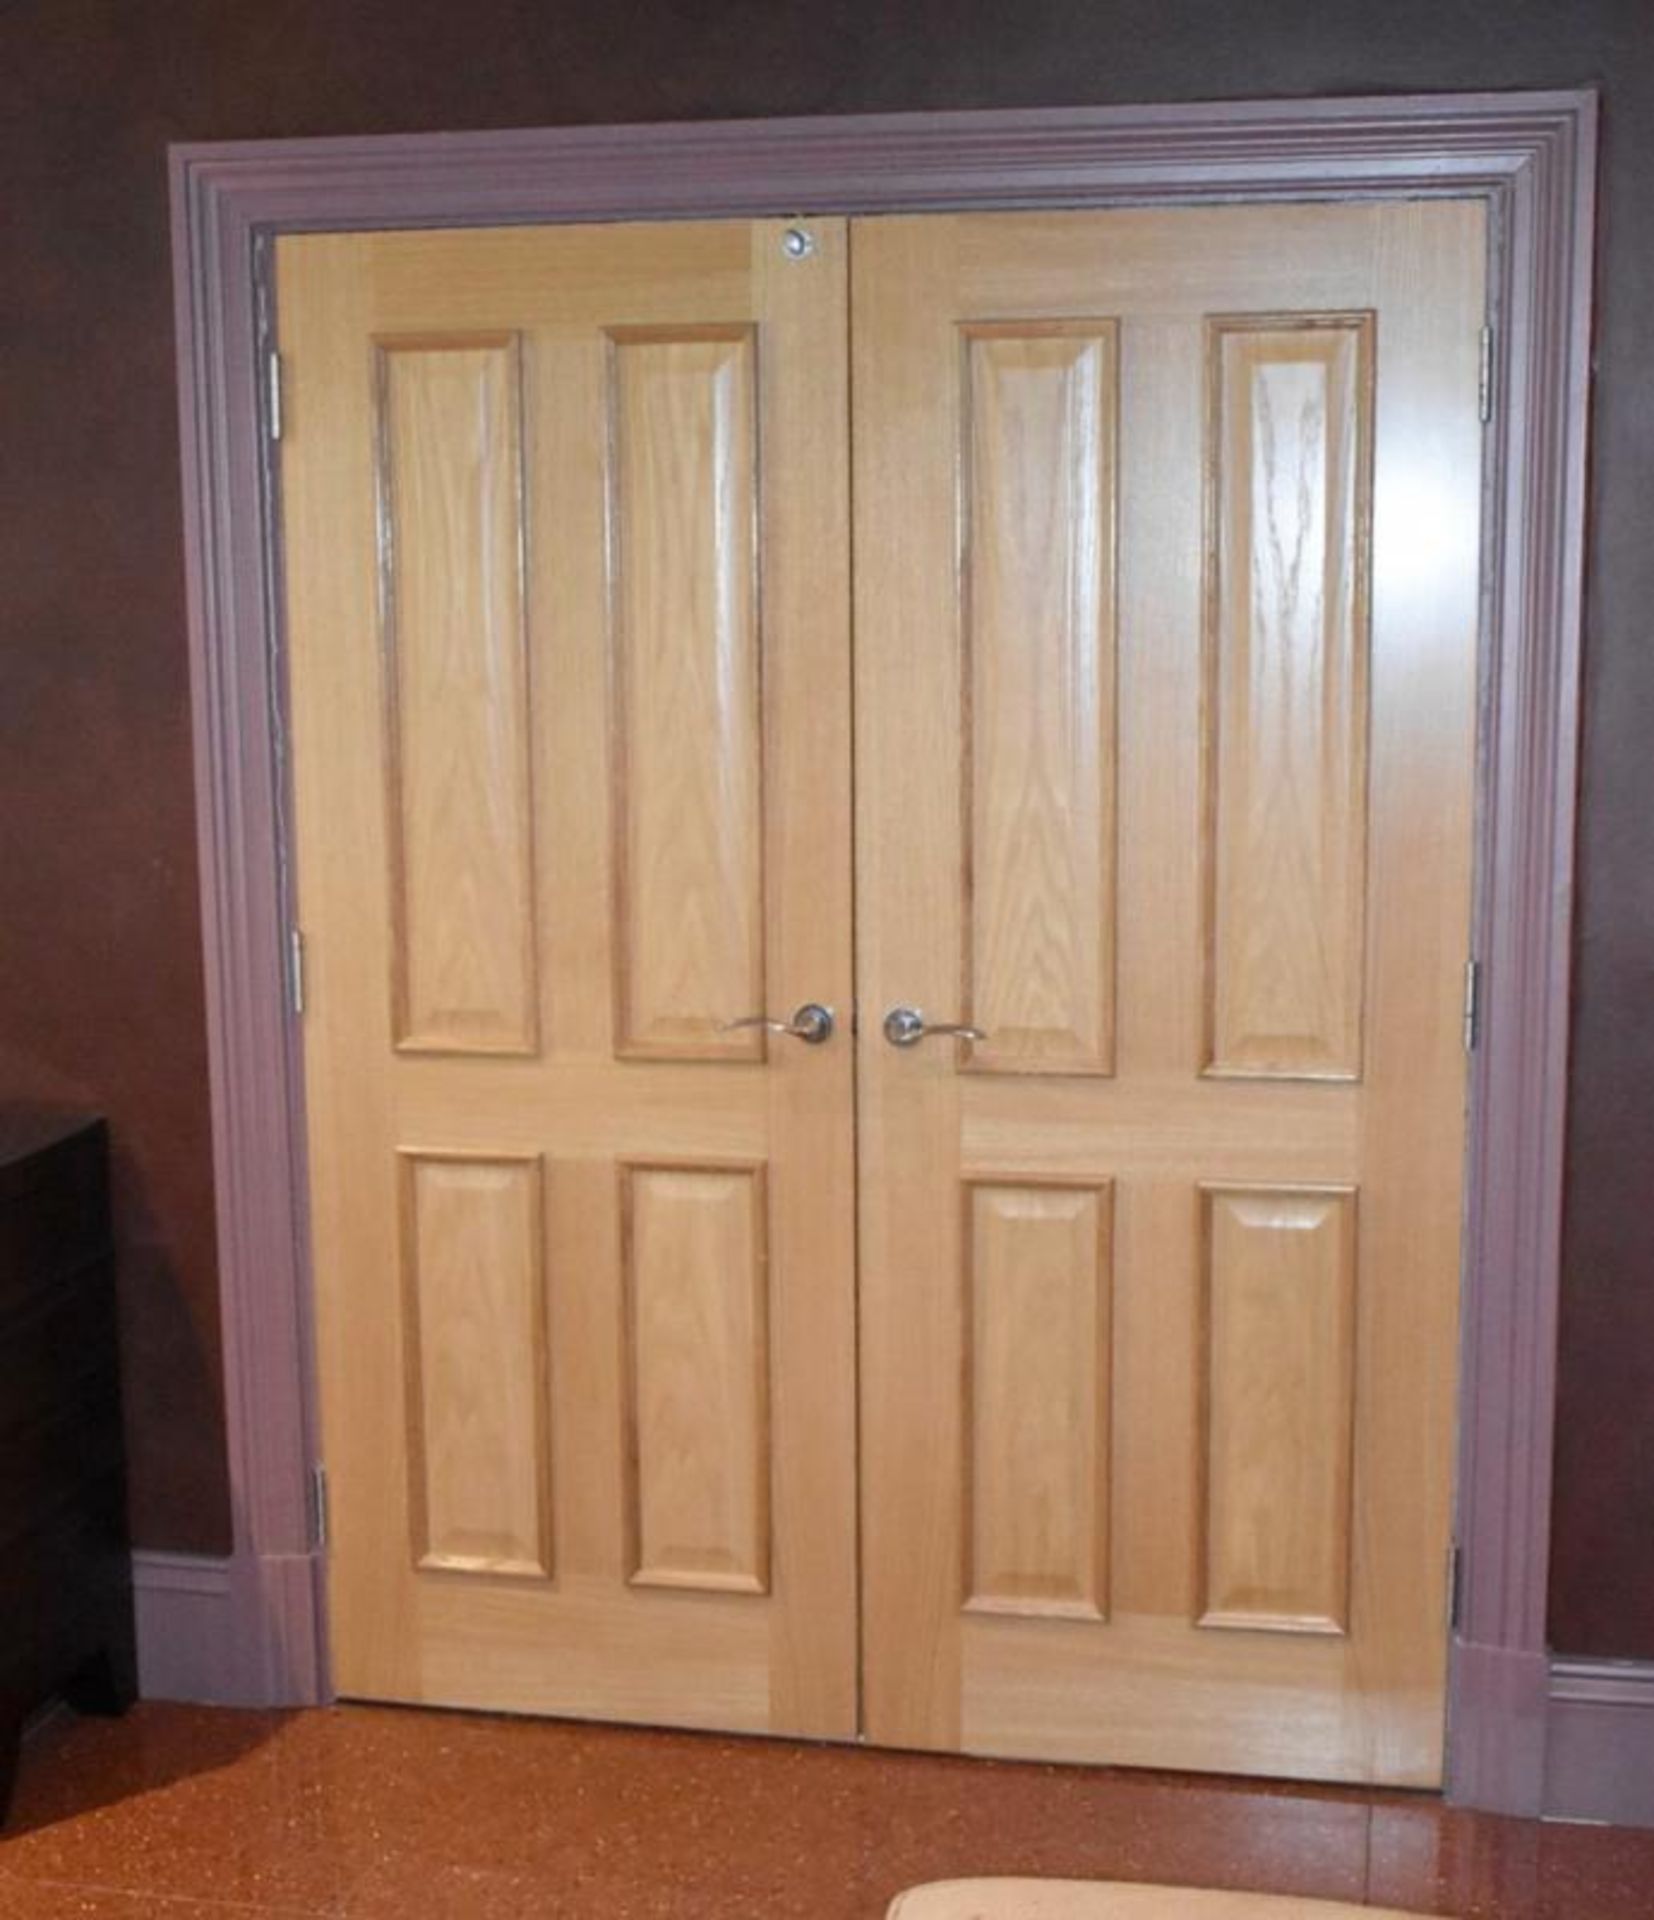 A Pair Of High Quality Internal Wooden Doors - Dimensions Of Each: H200 x W75 x 7cm - Ref: ABR015 / - Image 2 of 4